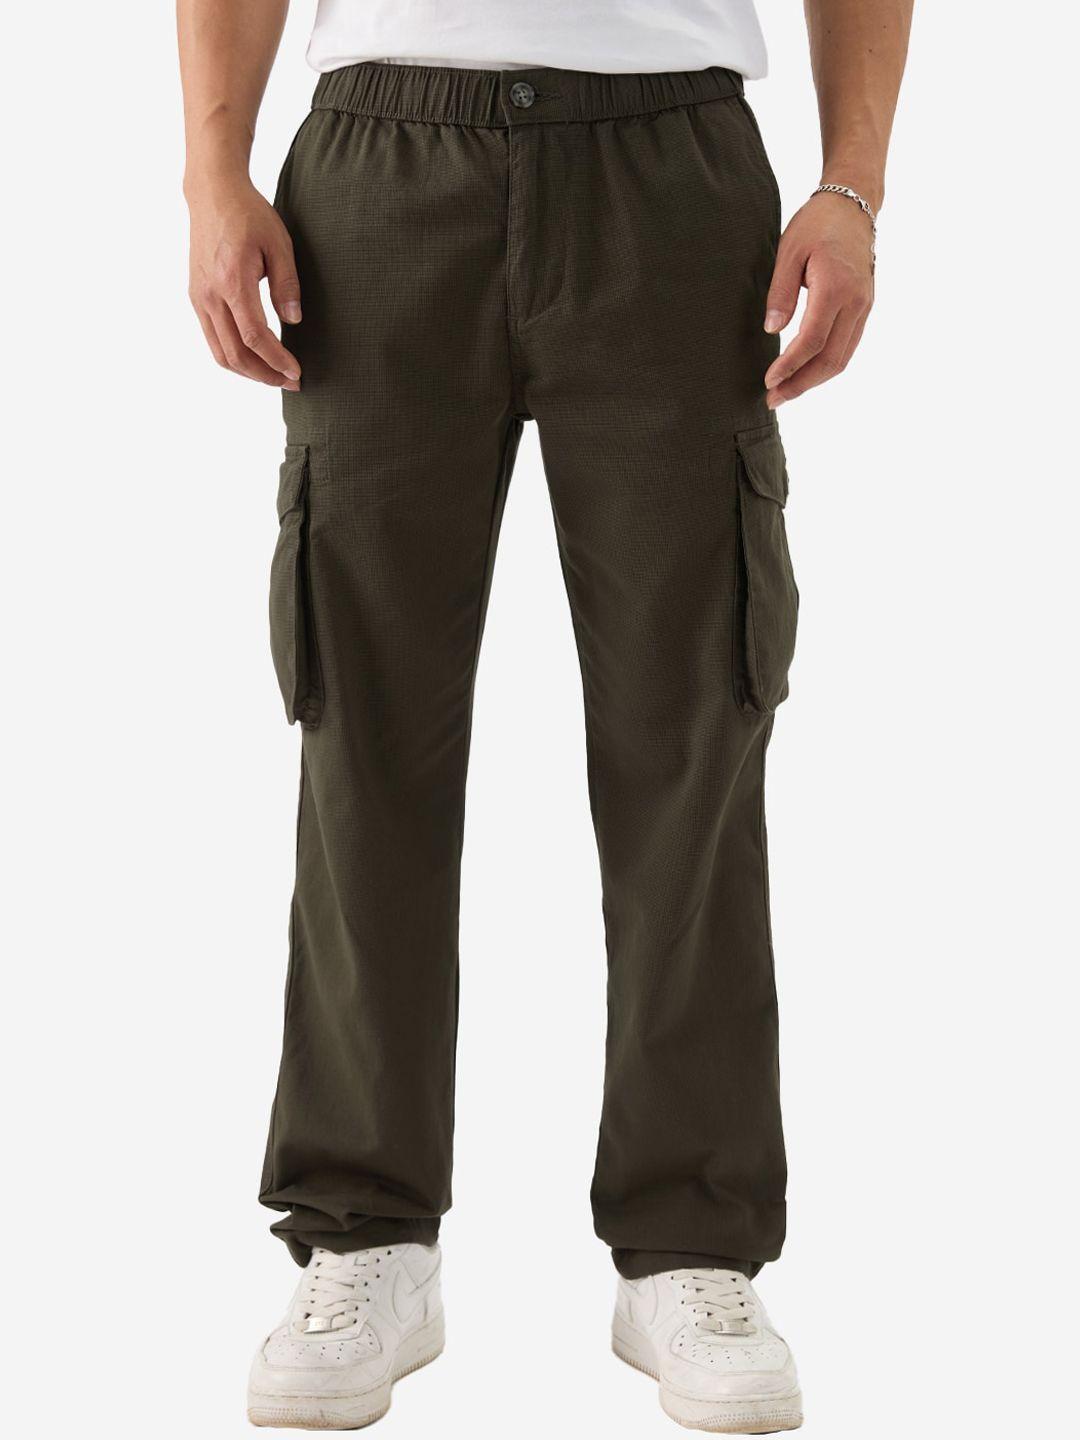 the souled store men cargos trousers